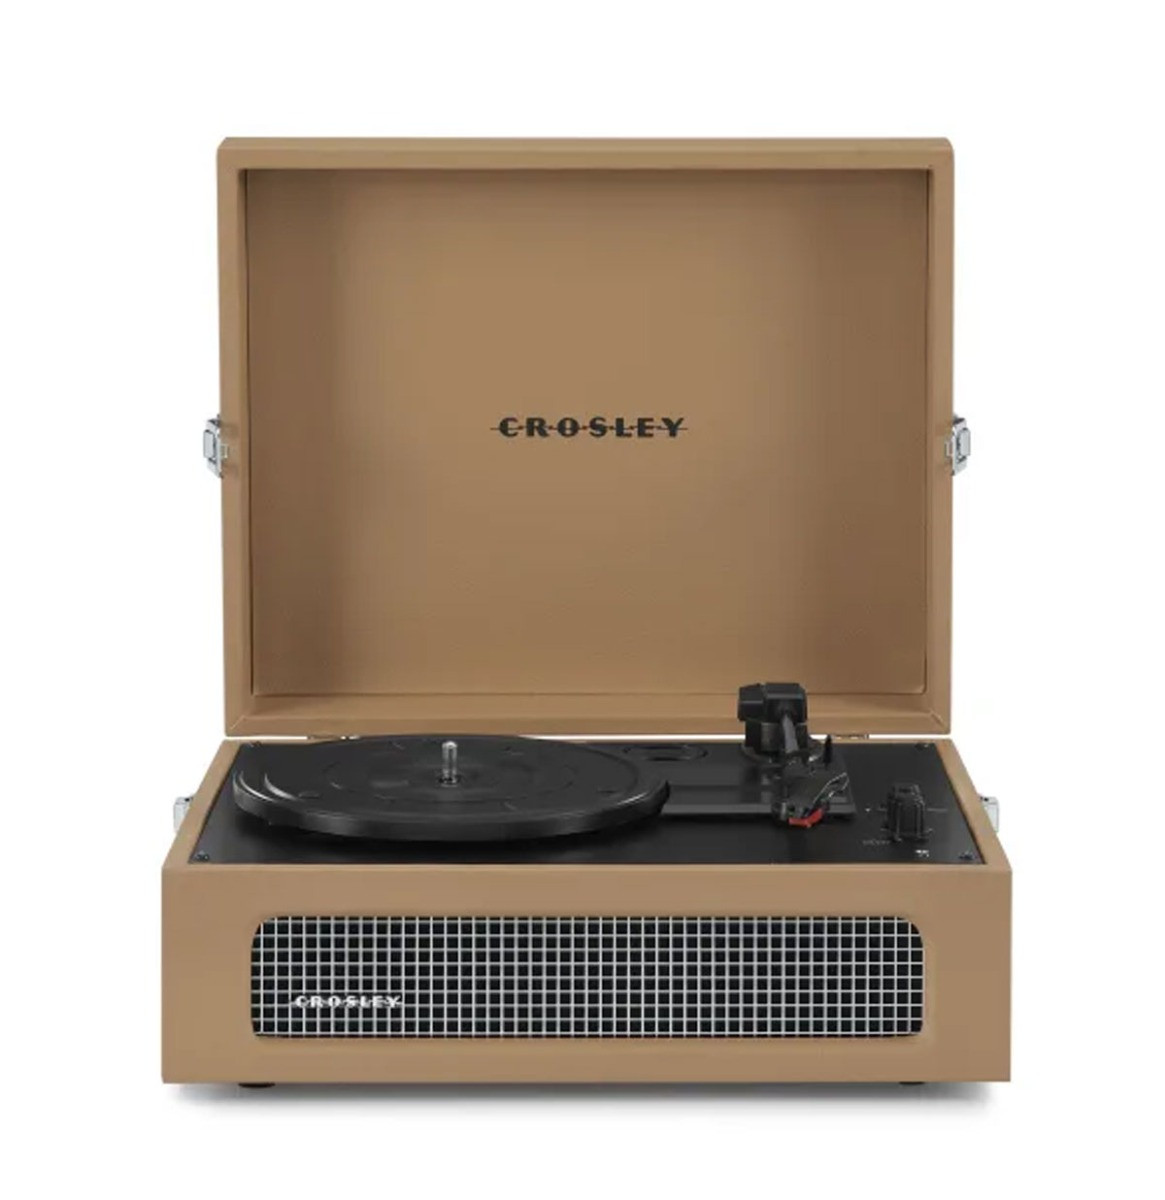 Crosley Voyager Portable Retro Platenspeler - Tan BLUETOOTH IN/OUT